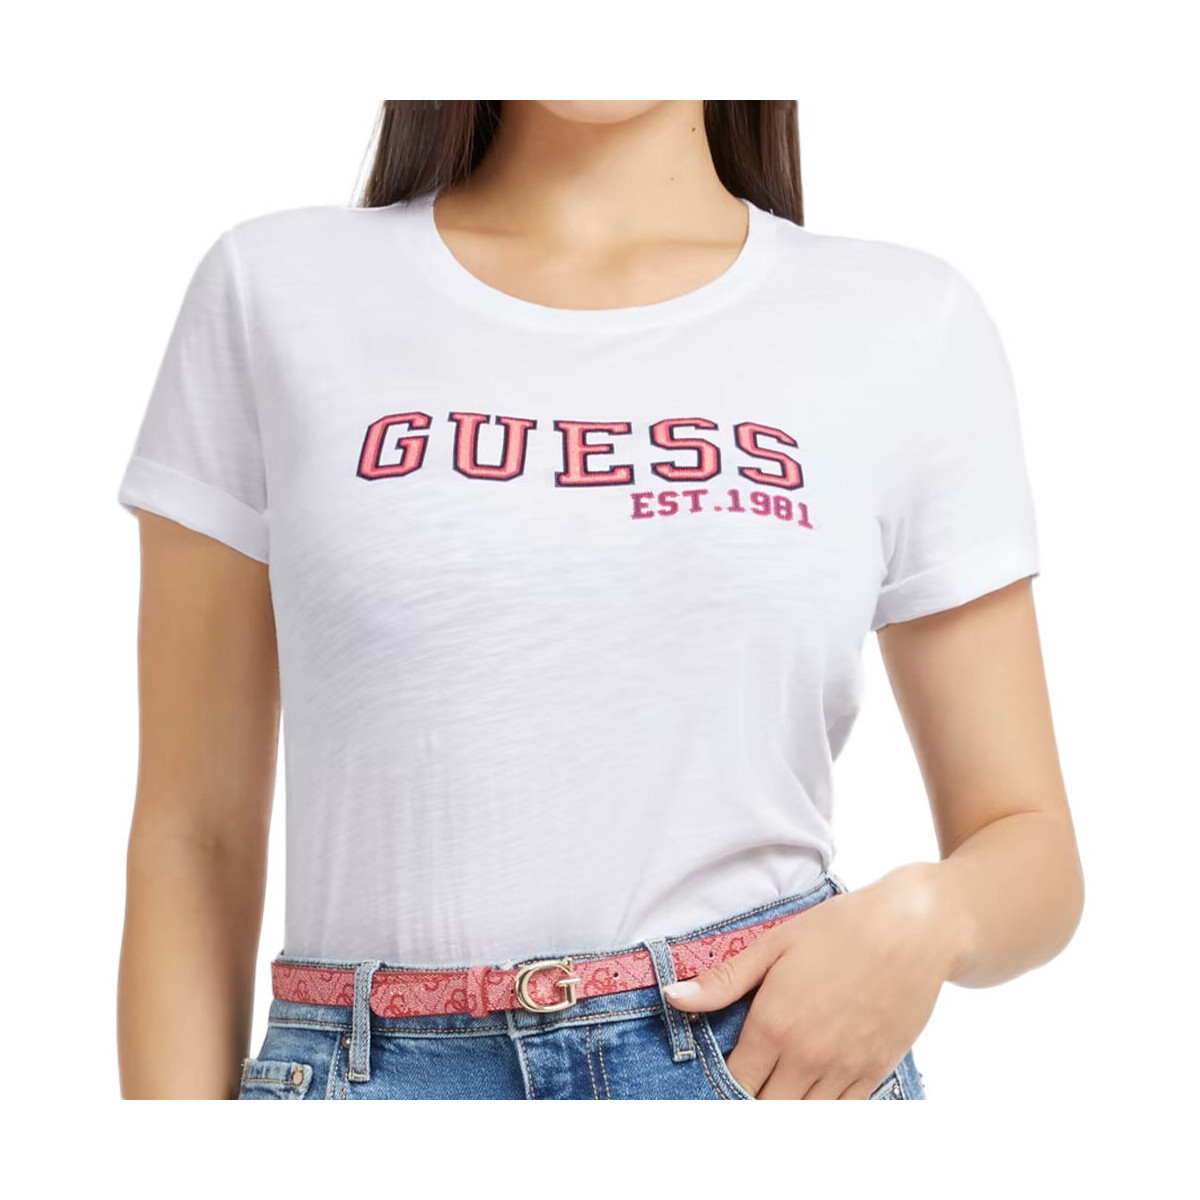 Textiel Dames T-shirts & Polo’s Guess  Wit